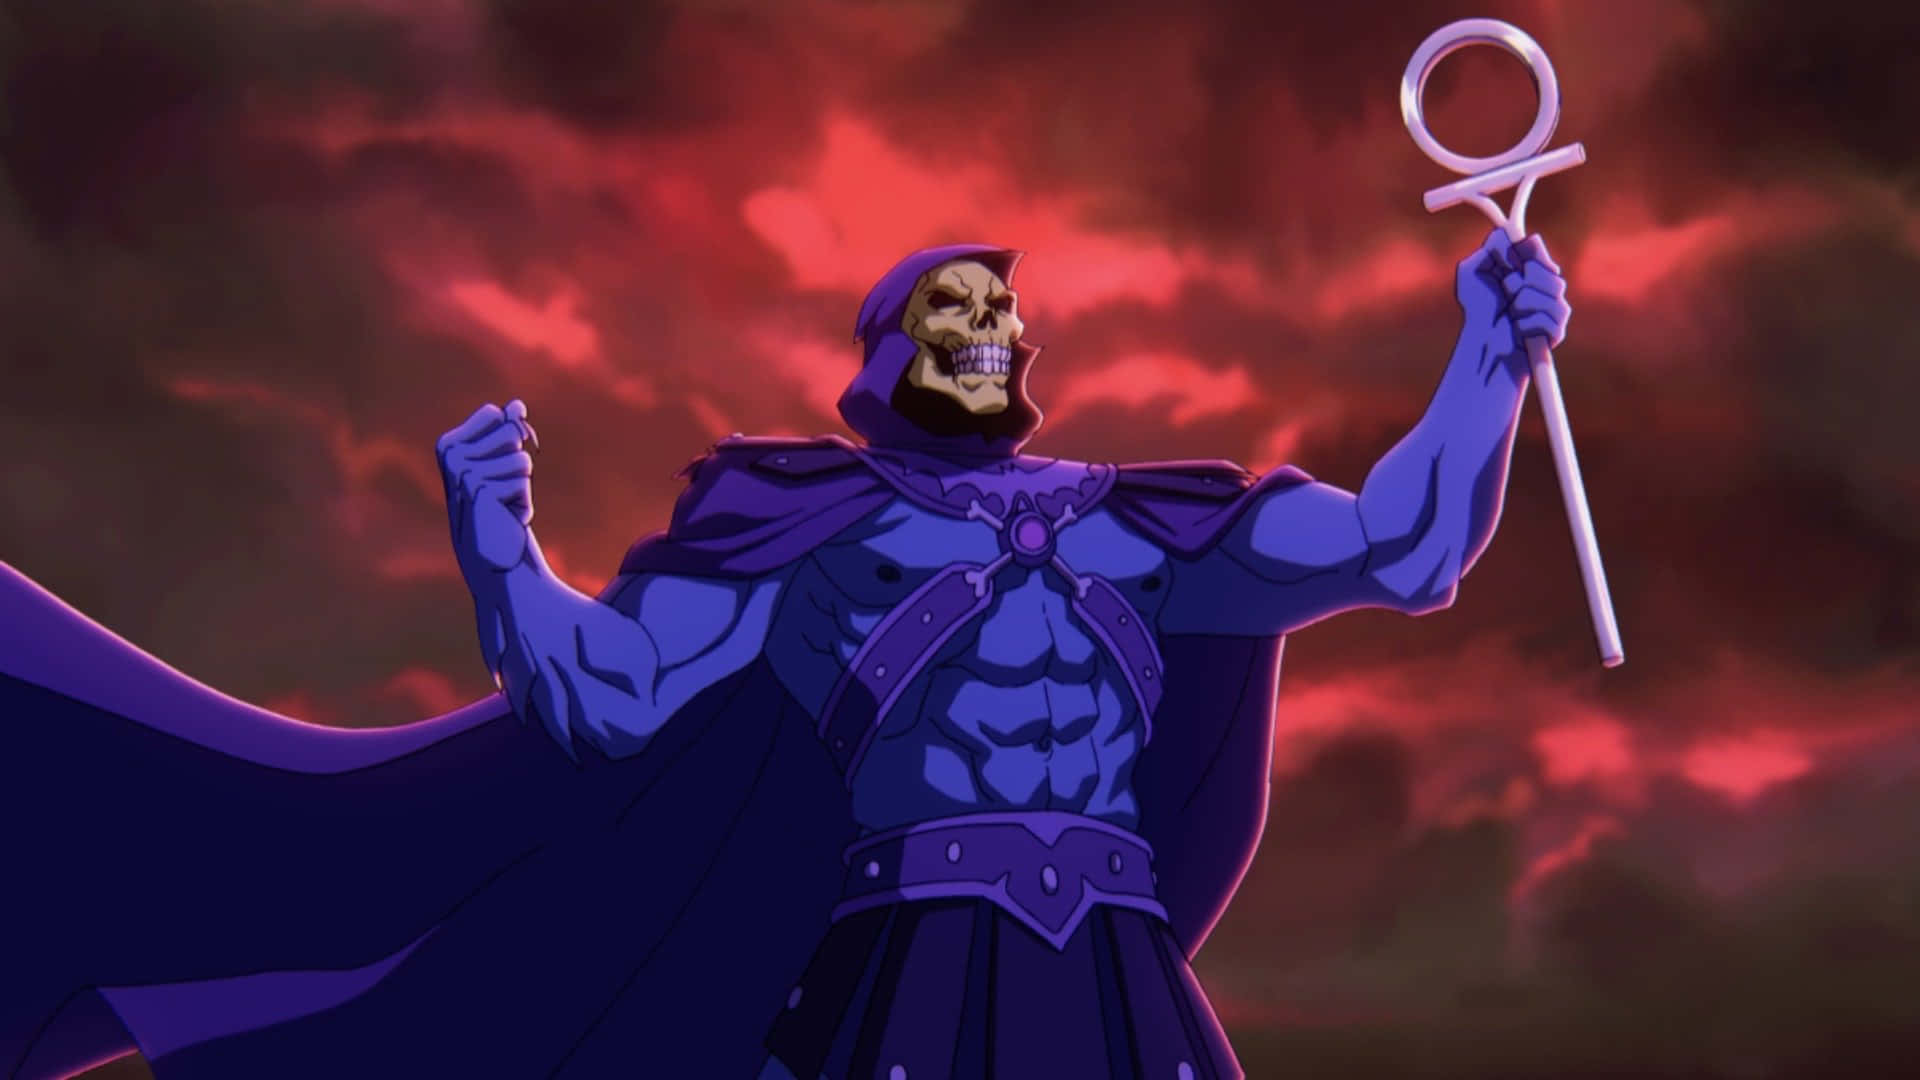 Wallpaper ID 700243  HeMan And The Masters Of The Universe Skeletor  1080P TV Show free download